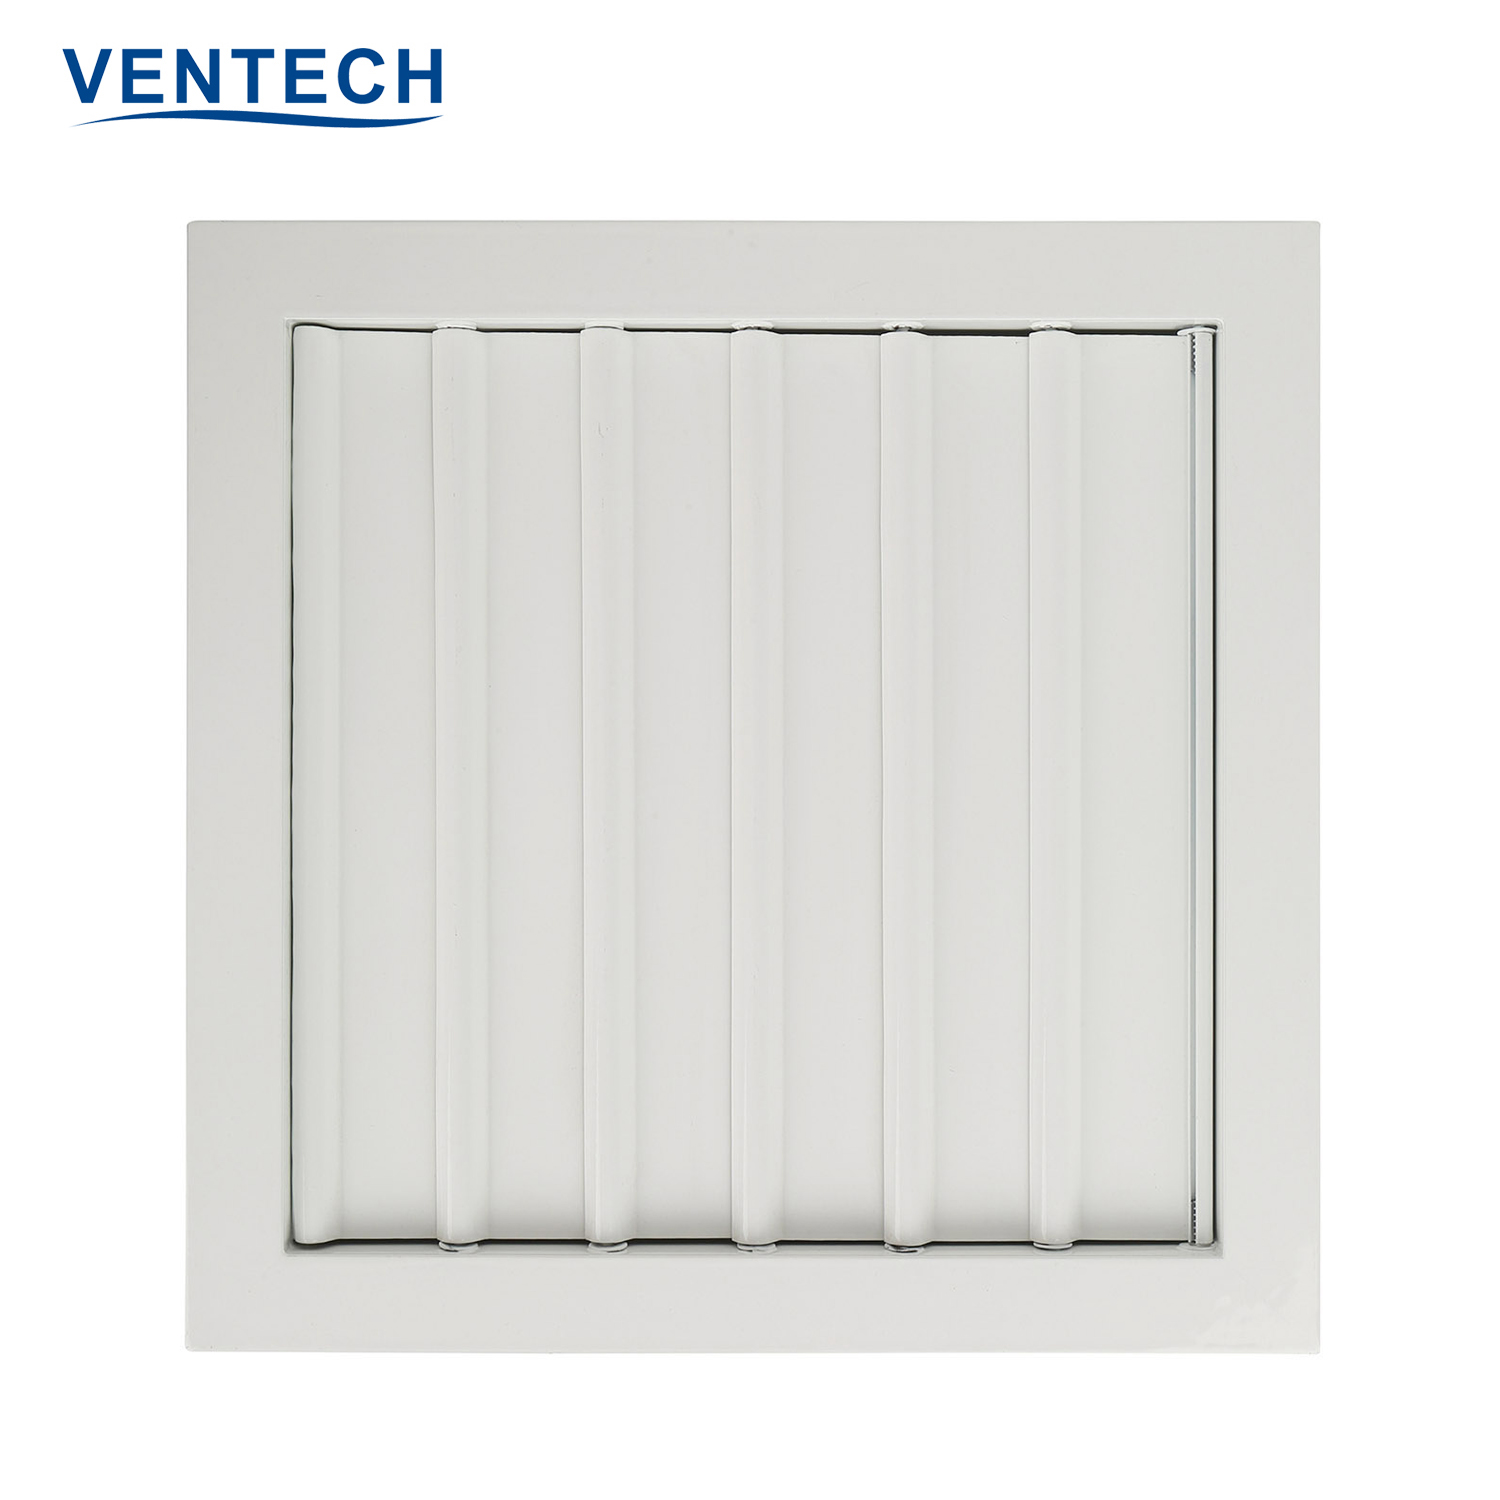 Ventech reliable hvac louvers and grilles with good price for long corridors-2